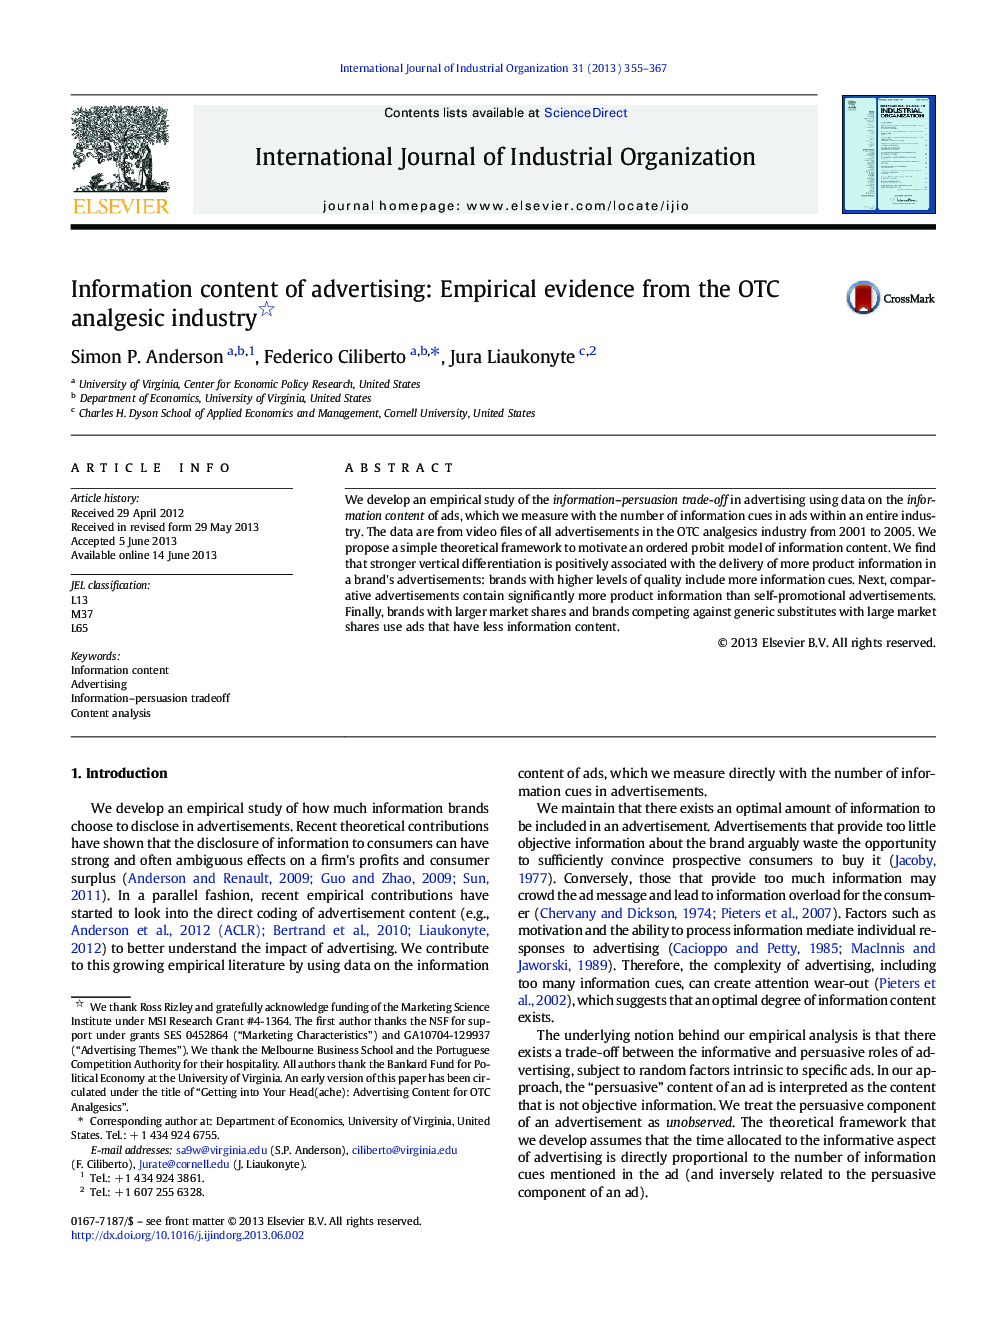 Information content of advertising: Empirical evidence from the OTC analgesic industry